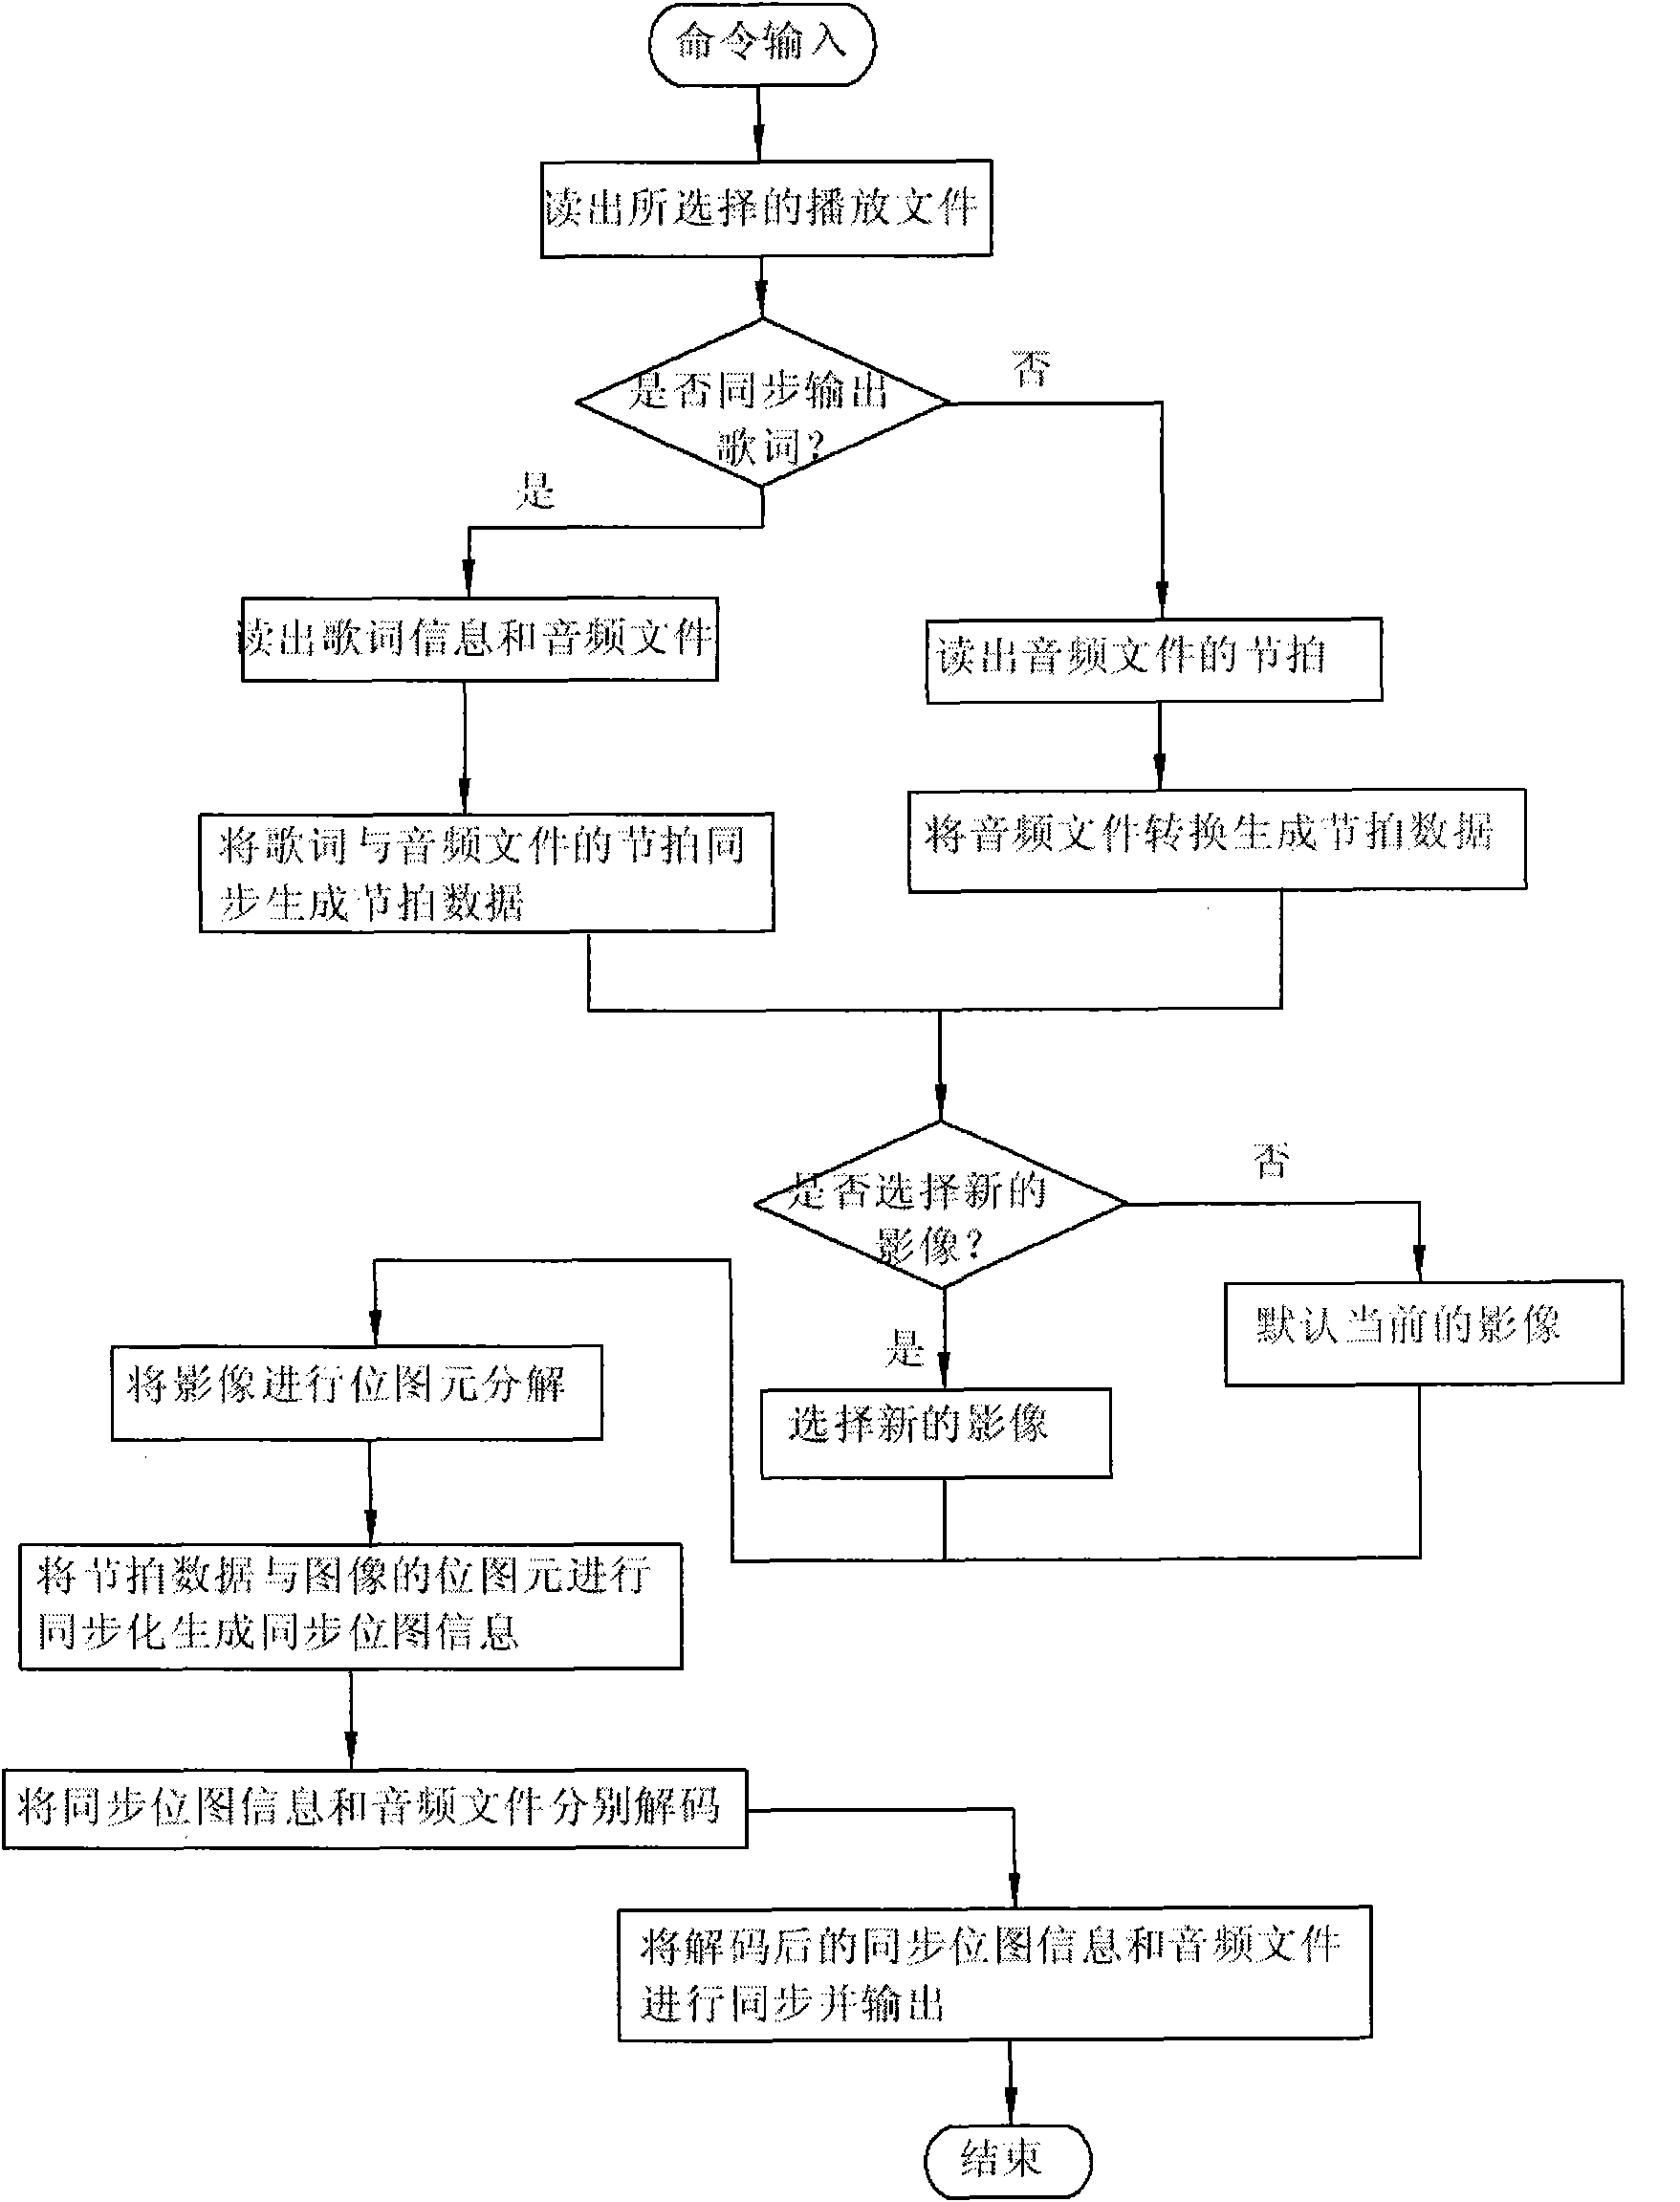 Method for outputting video under control of music rhythm and playing device